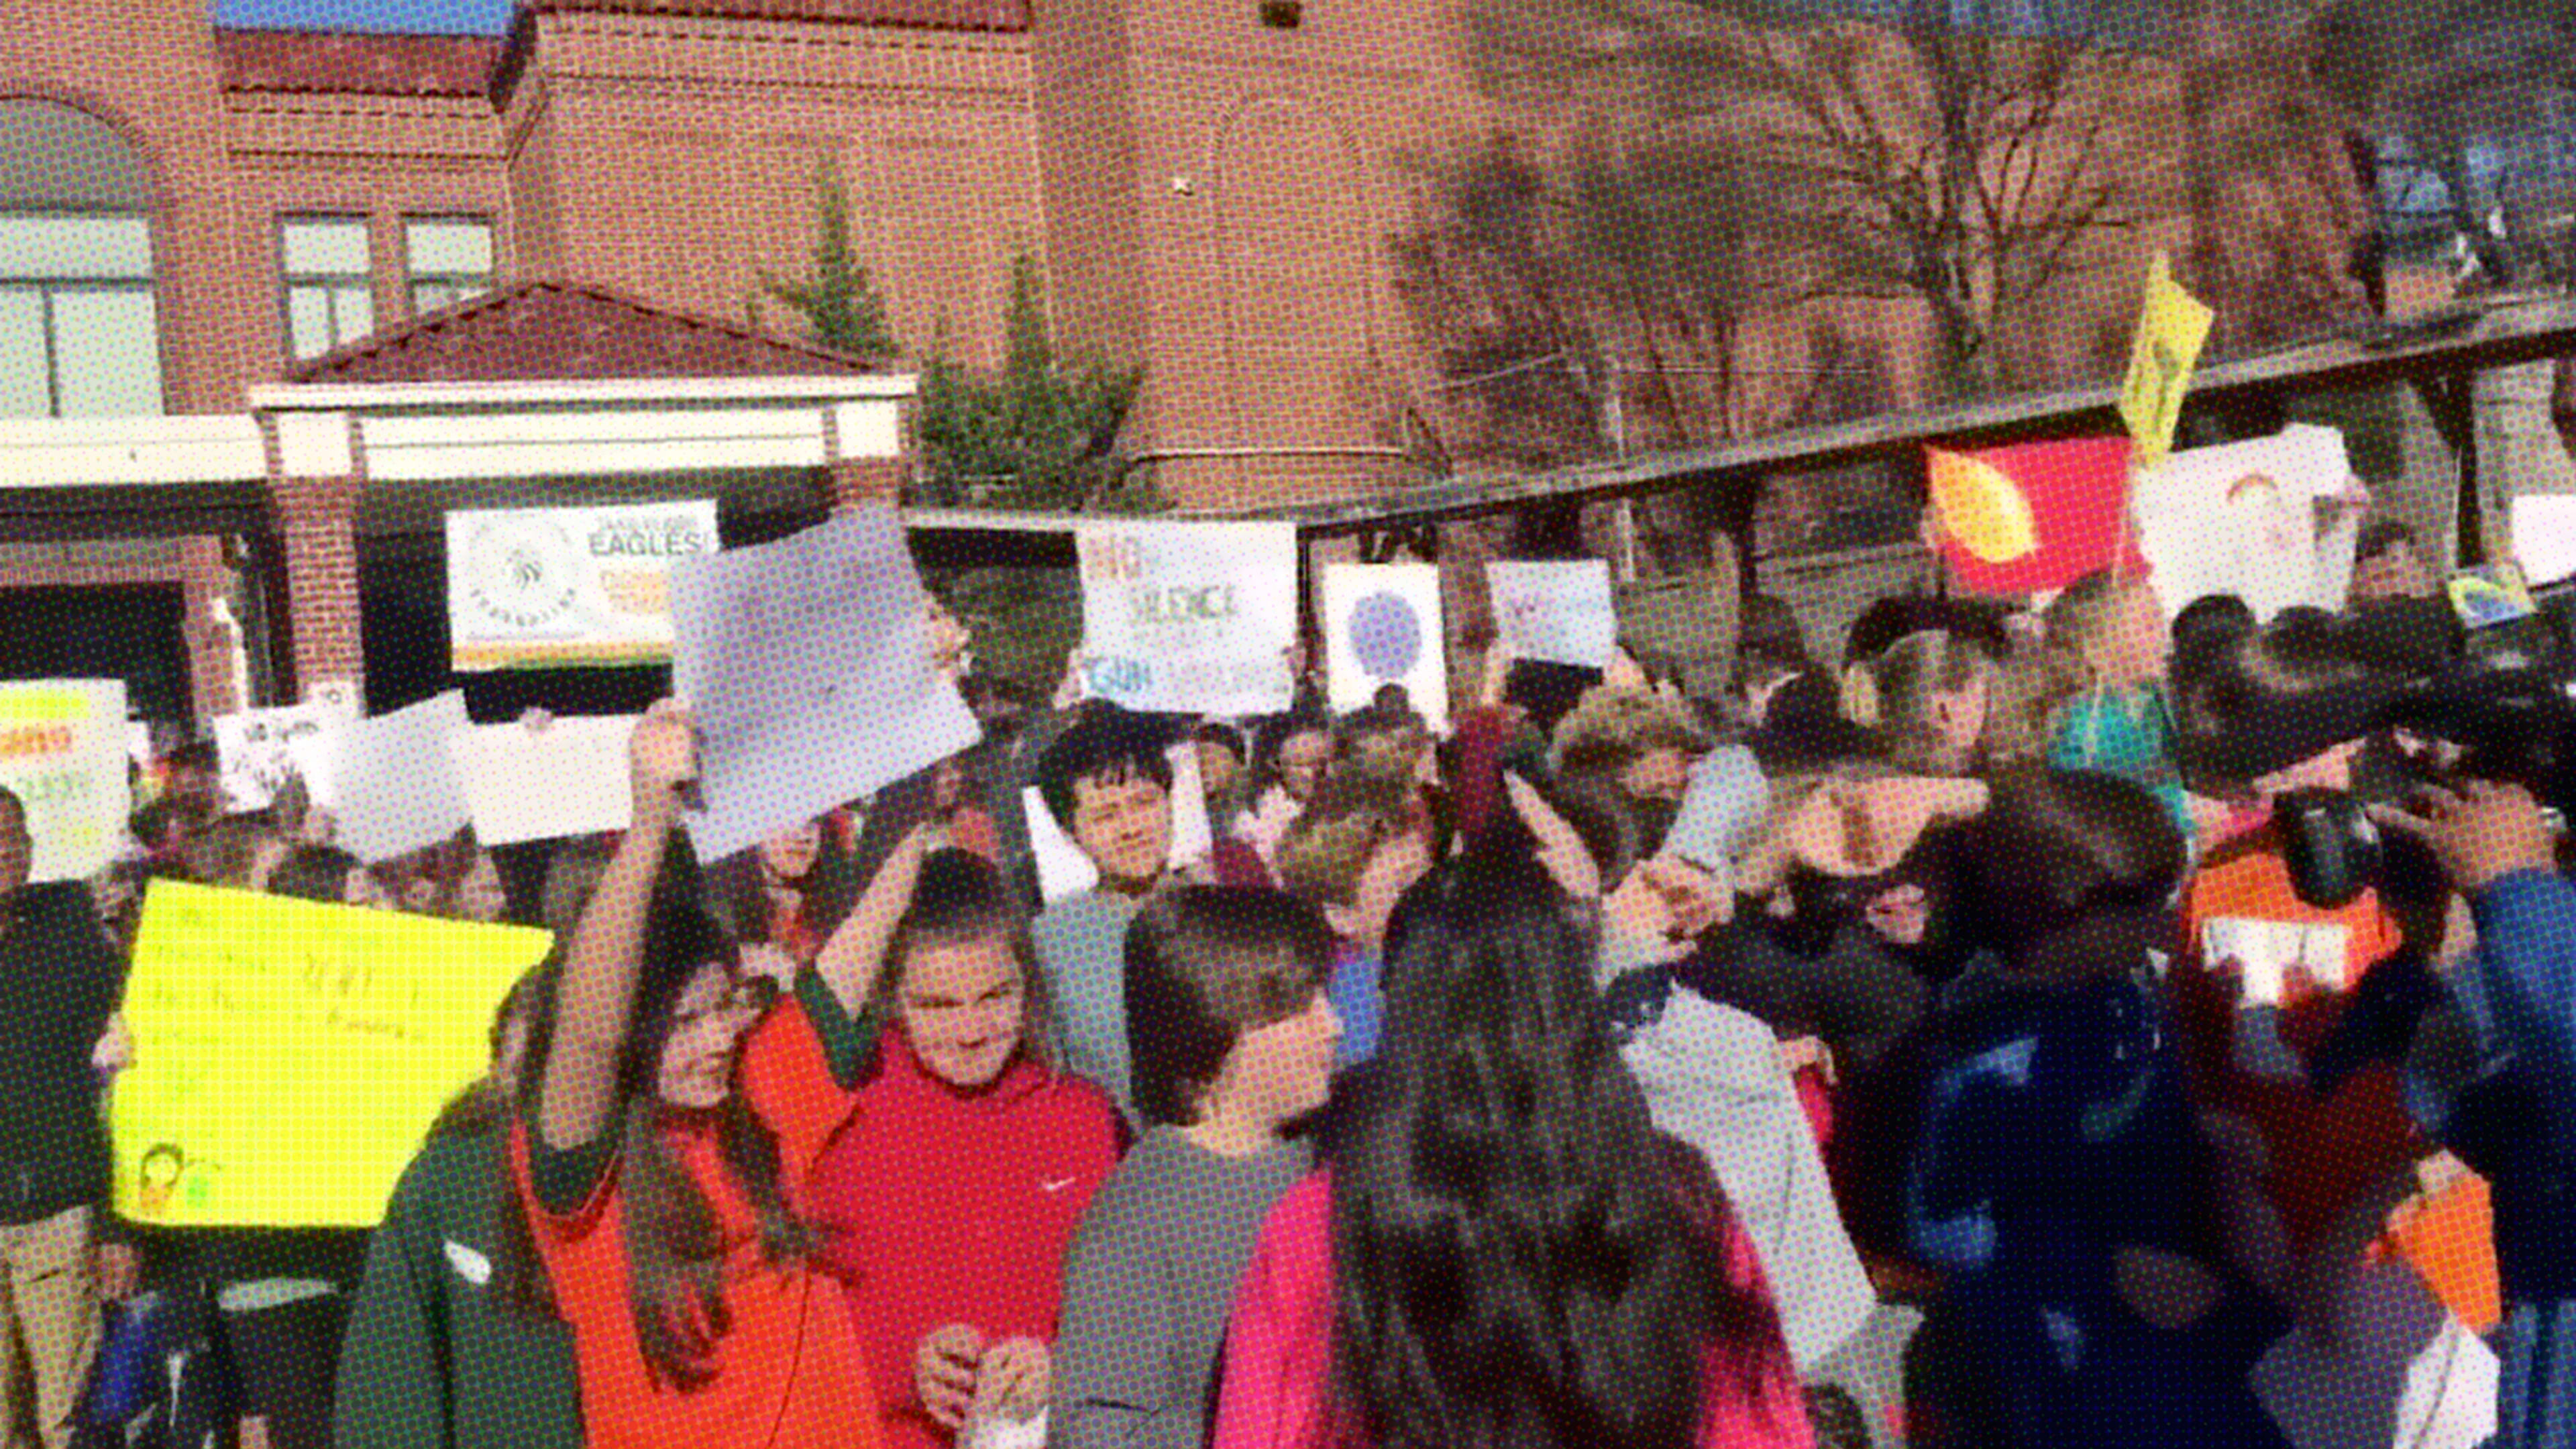 School walkouts: Emotional videos and photos show students are fed up with shootings